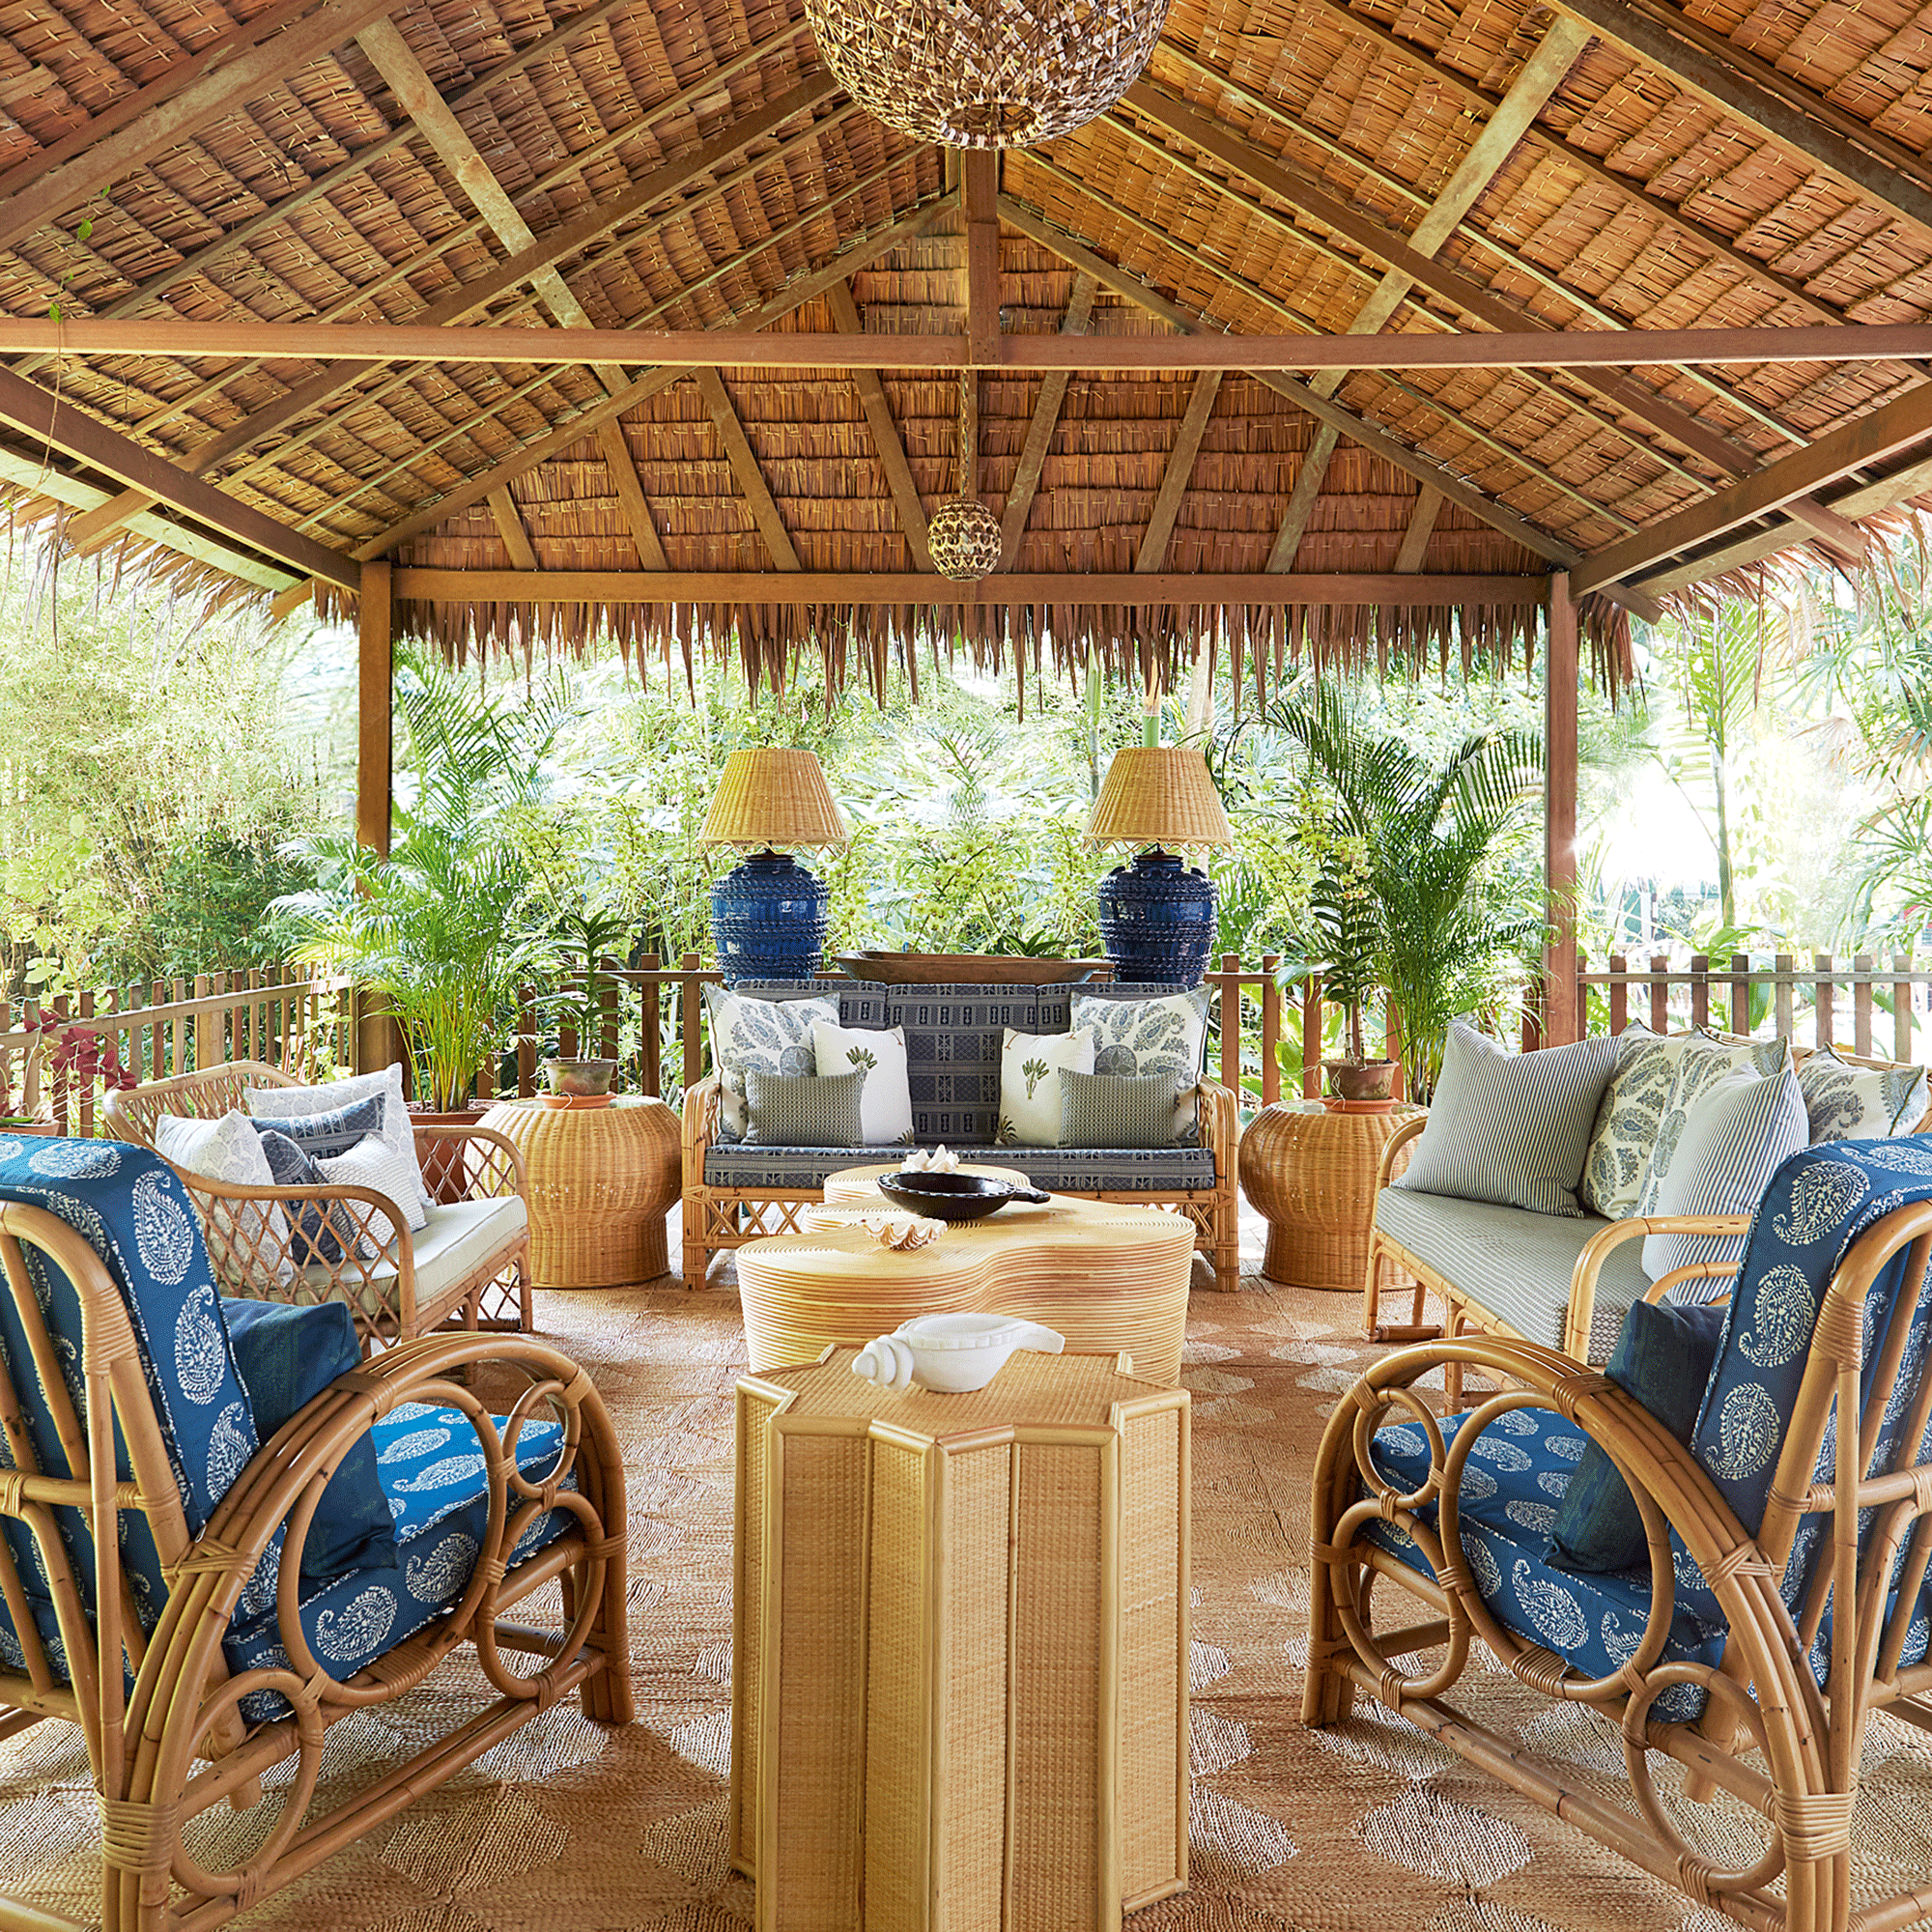 Straw roof garden room with rattan chairs